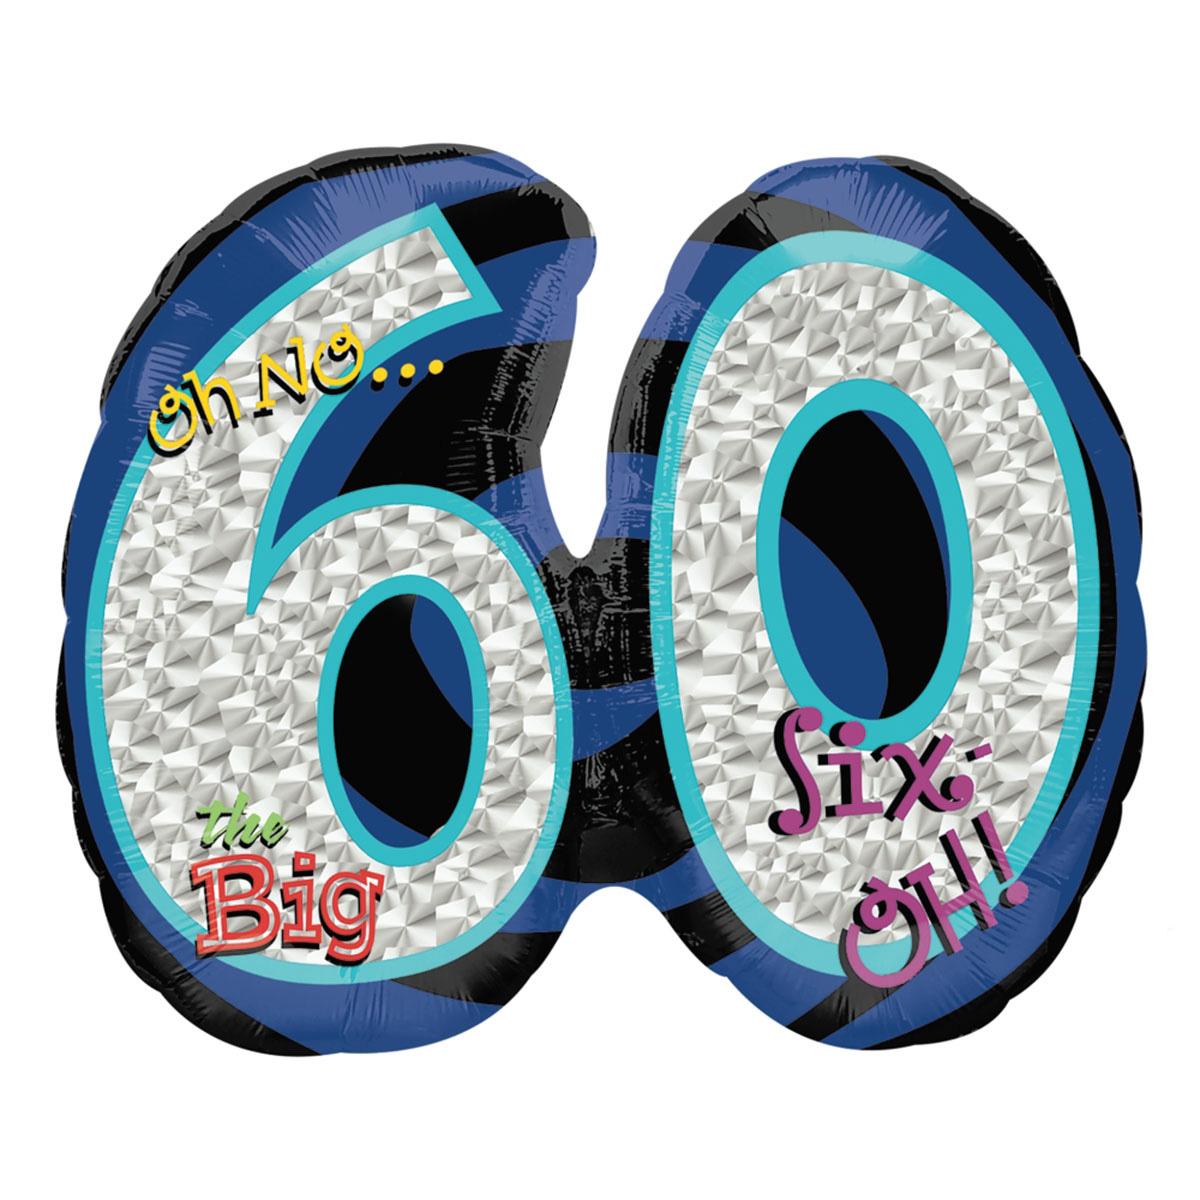 Oh No The Big 60 Holographic Balloon 26 x 21in Balloons & Streamers - Party Centre - Party Centre